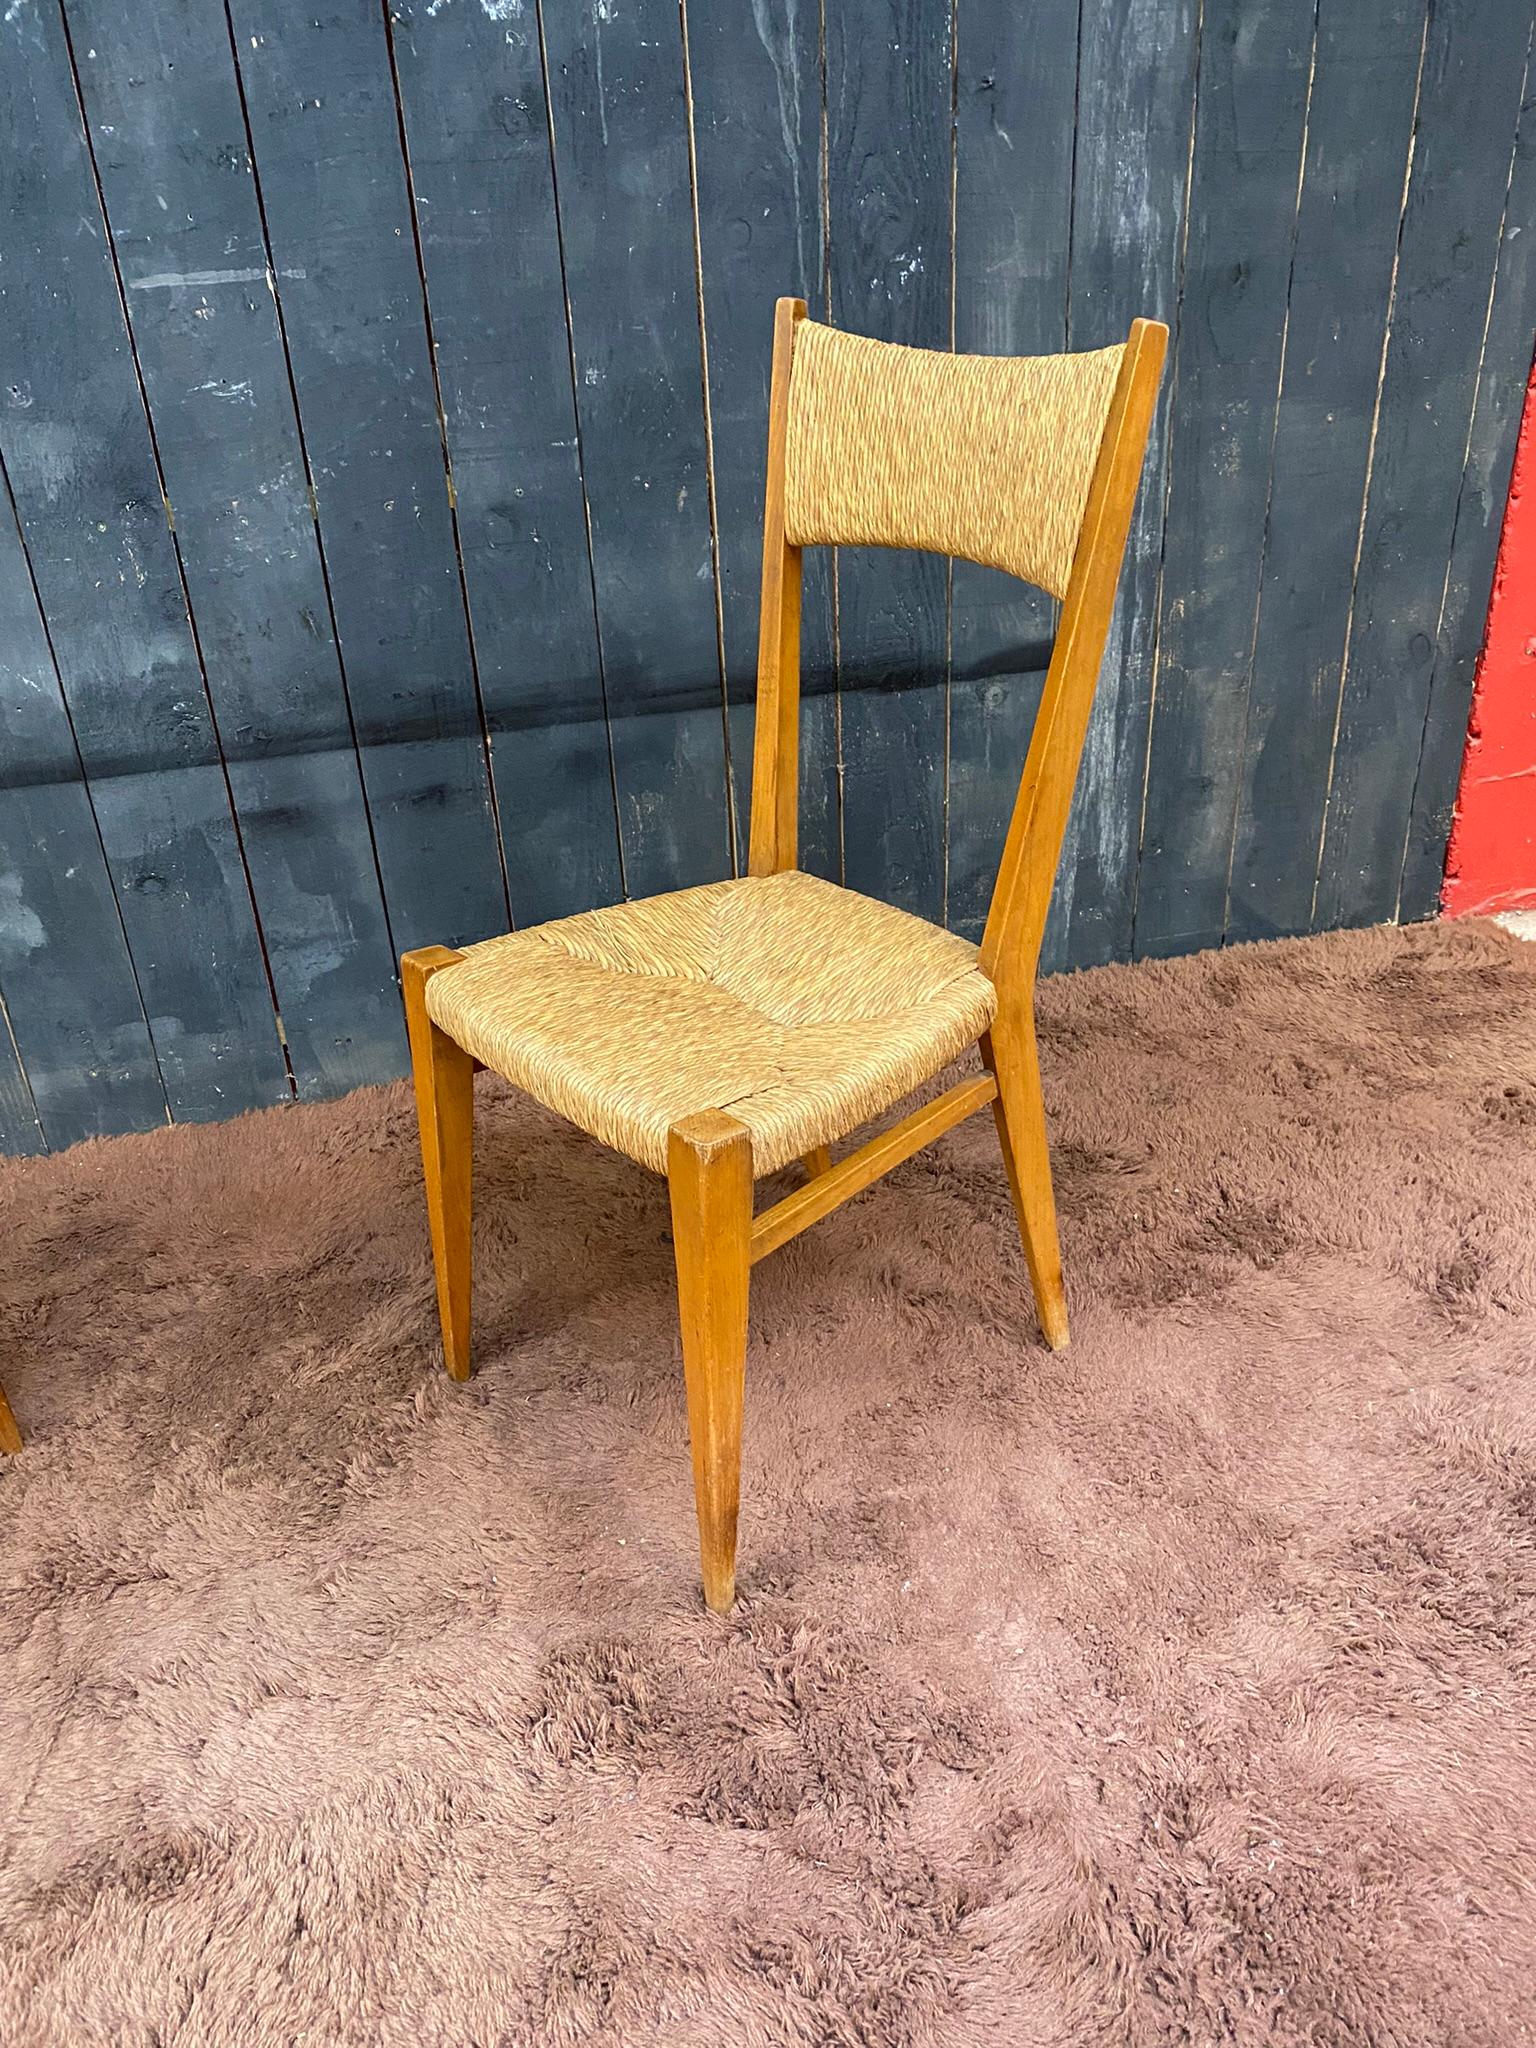 Series of 6 Elegant Oak Chairs, French Reconstruction Period, circa 1950 For Sale 5